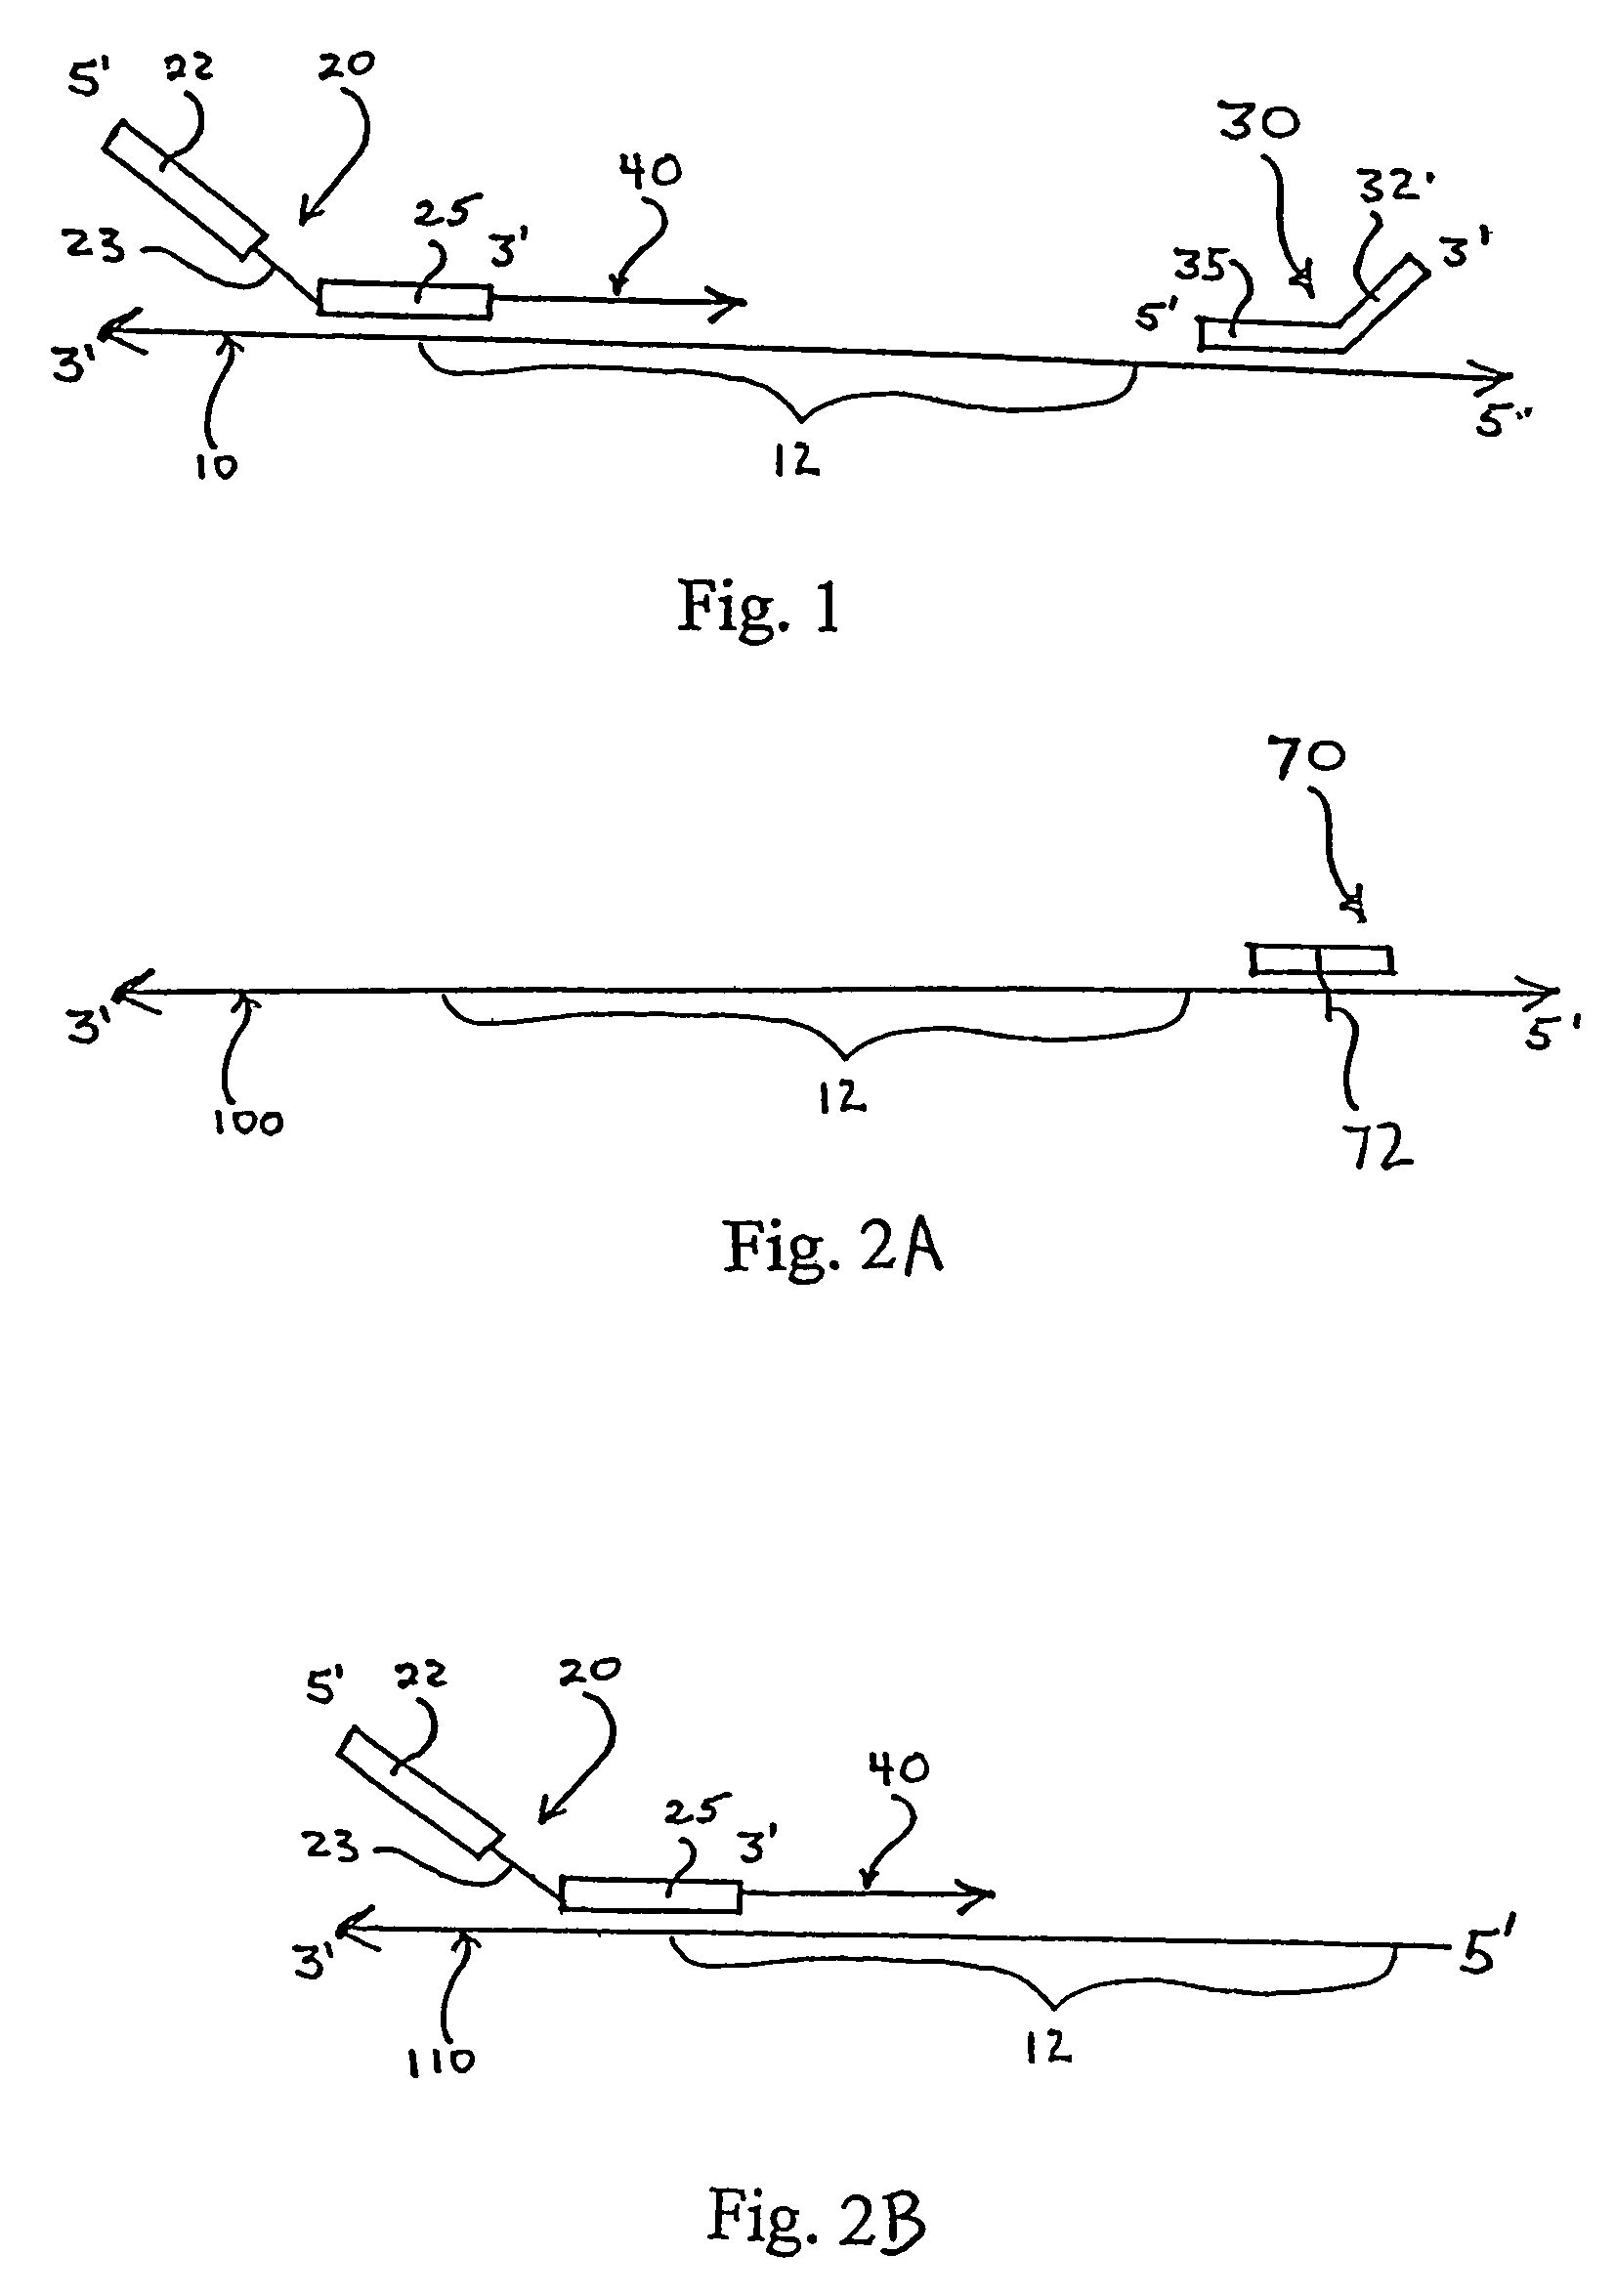 Engineered templates and their use in single primer amplification